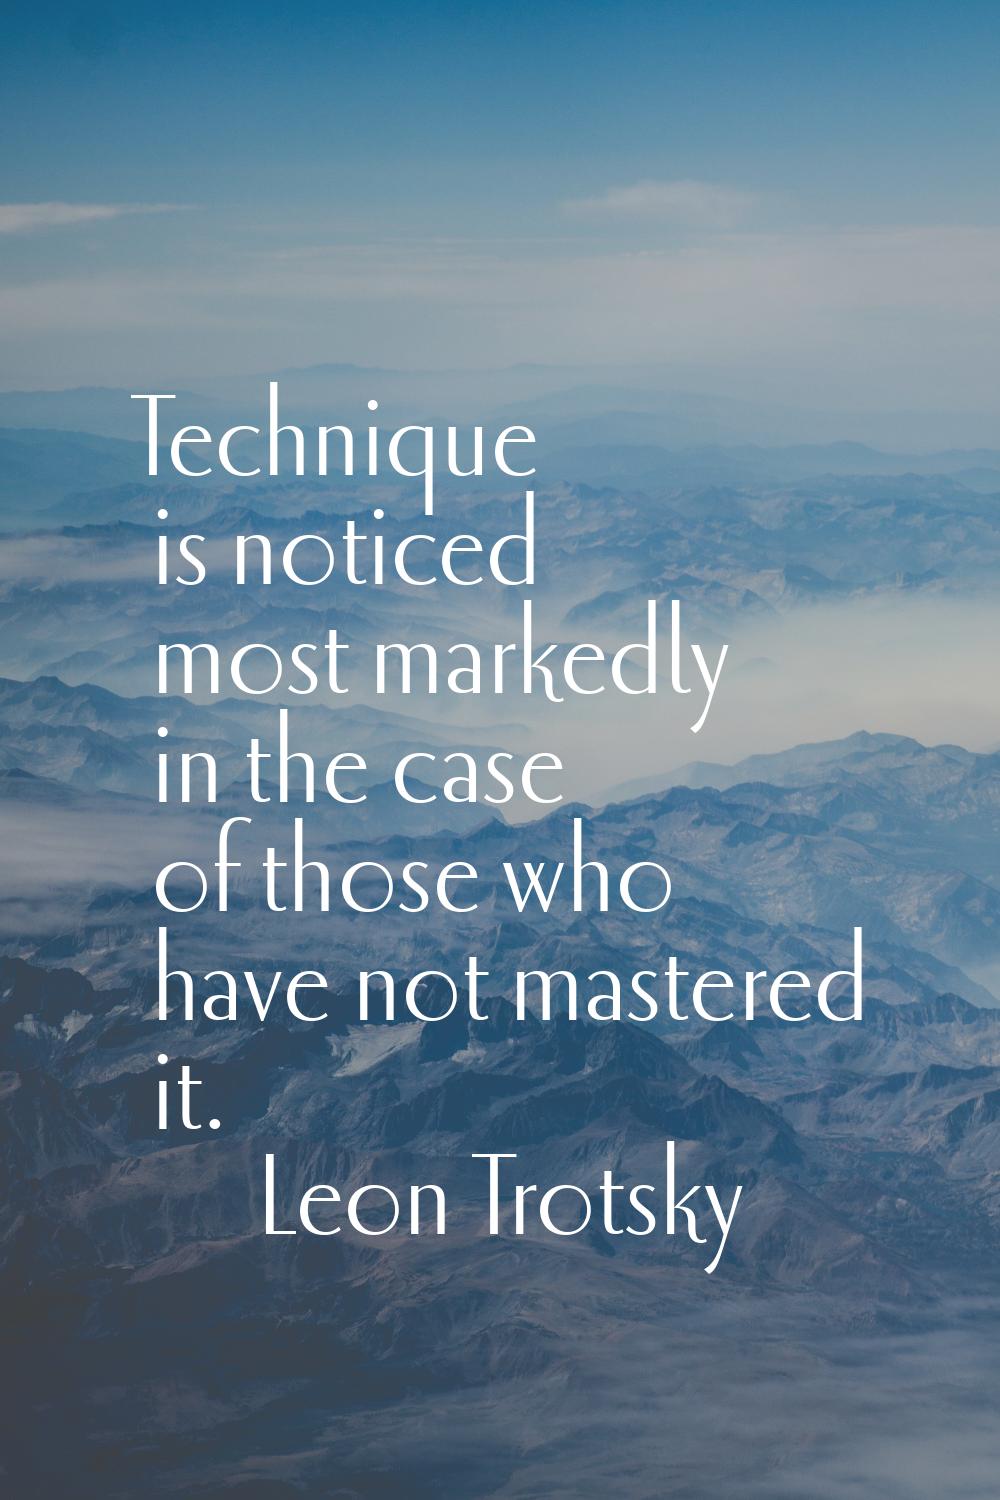 Technique is noticed most markedly in the case of those who have not mastered it.